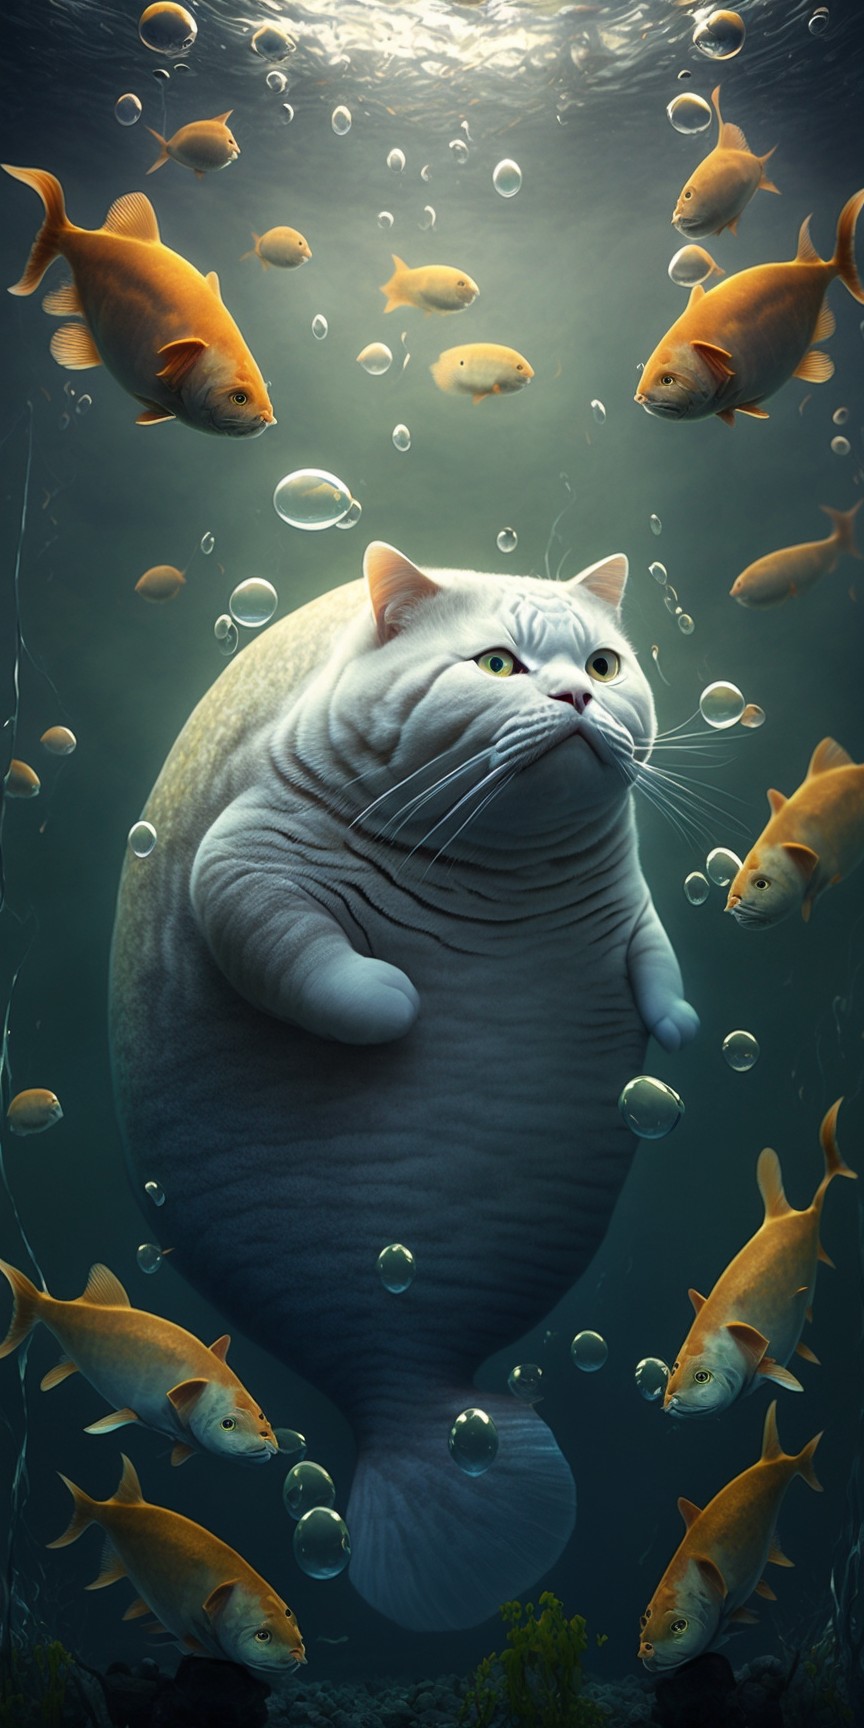 11 images of cat surrounded by fish by Midjourney